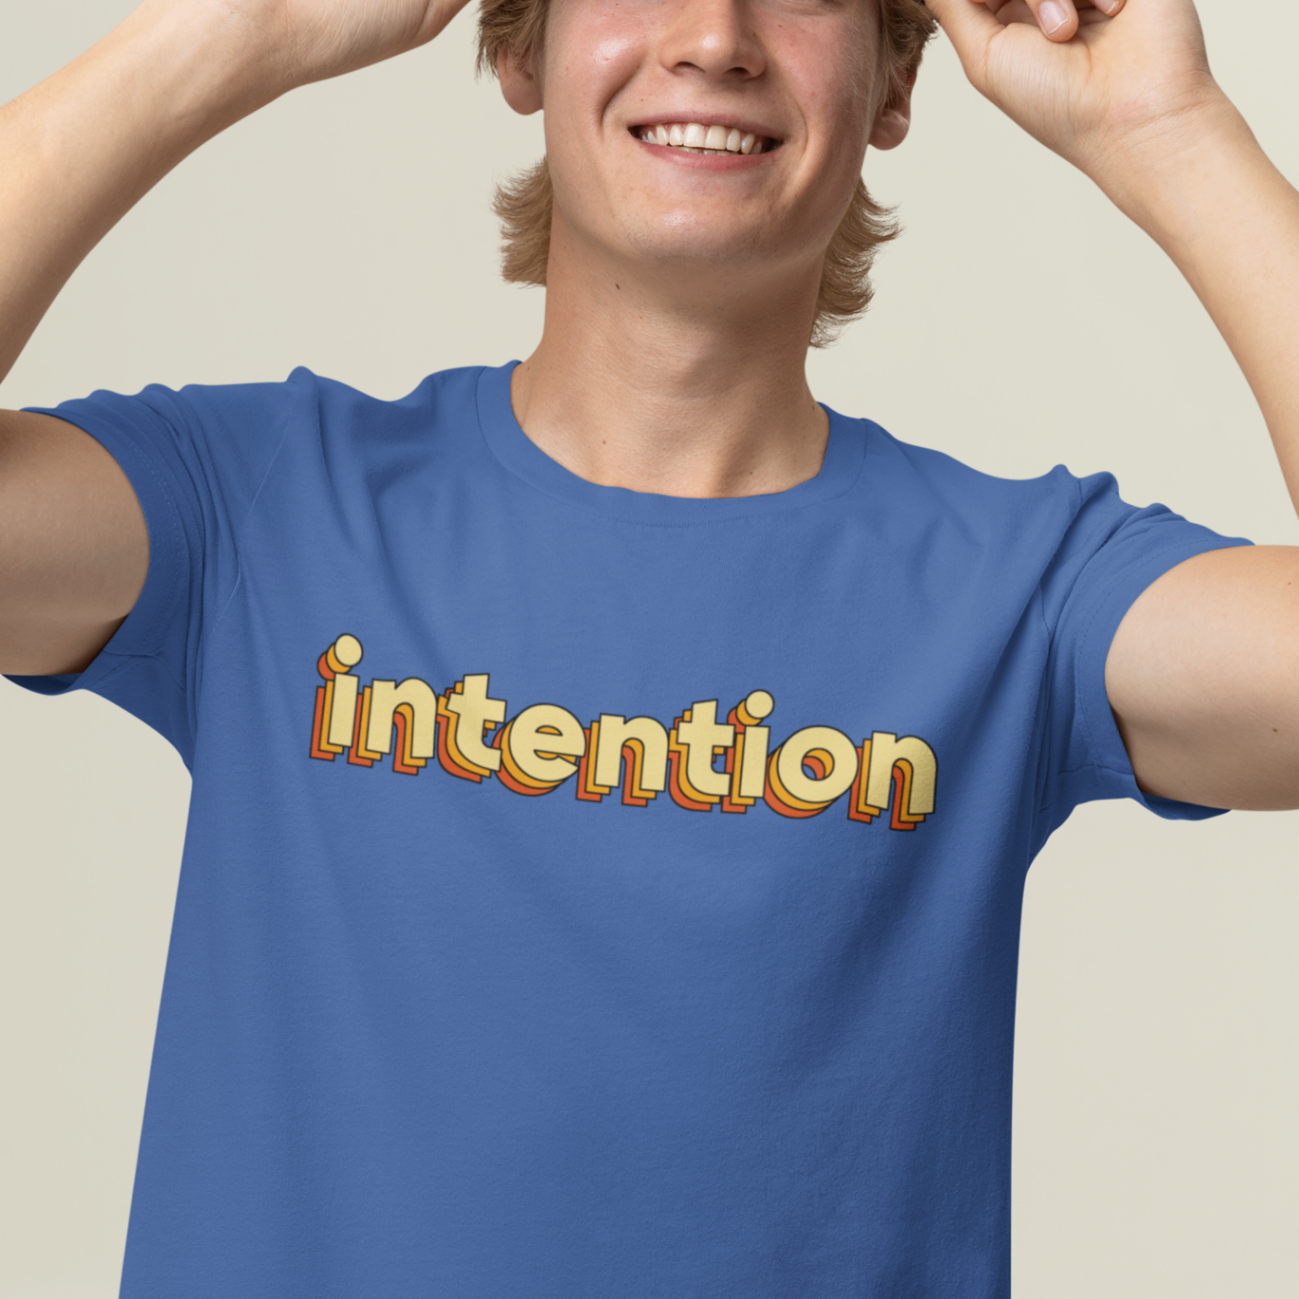 a smiling male model wearing a royal blue t shirt with intention written in 3 D lettering